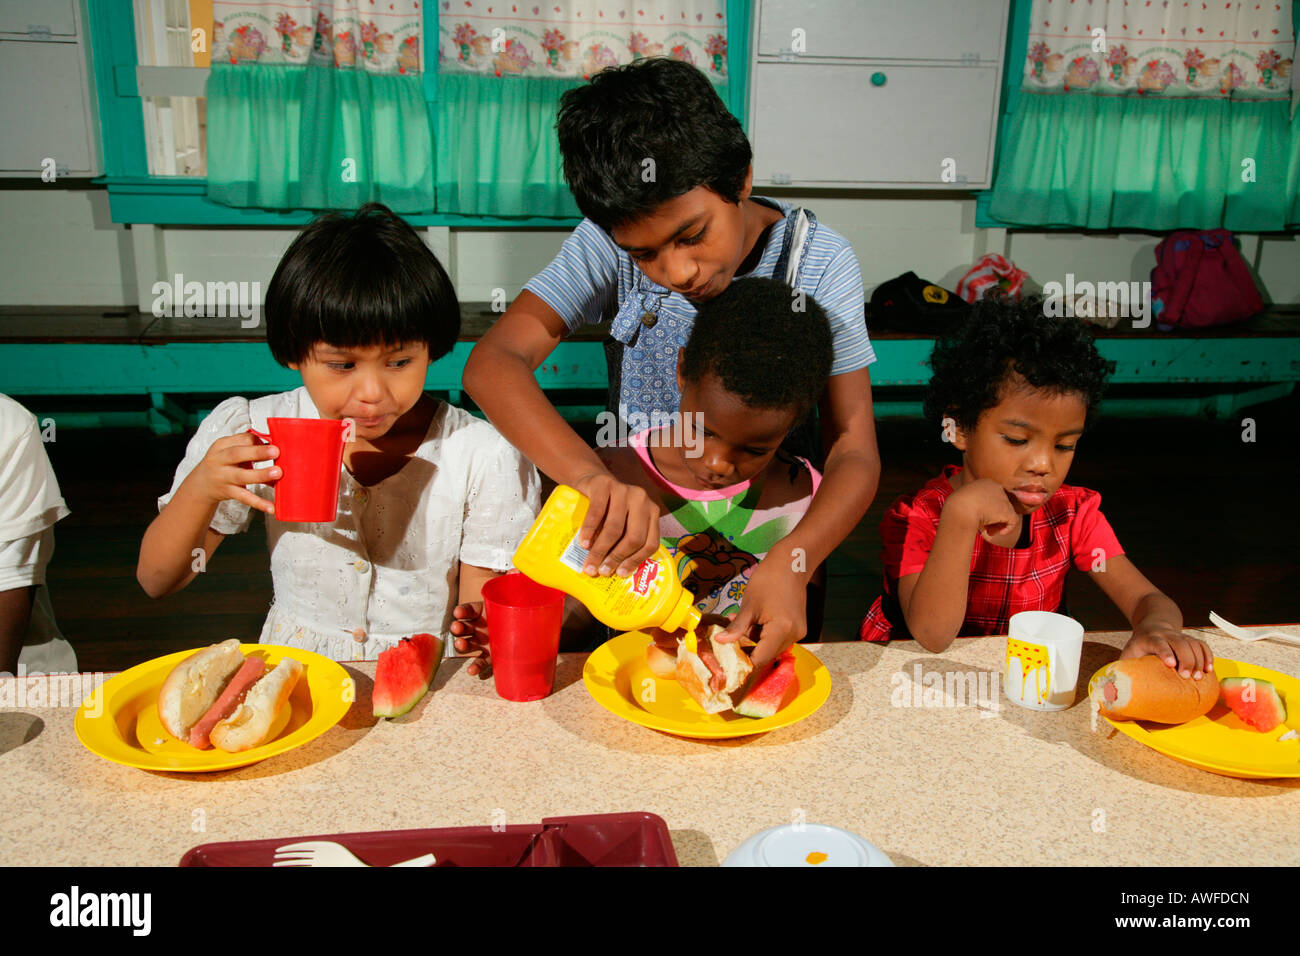 Girls with full plates, everyday life at an Ursuline convent and orphanage, Georgetown, Guyana, South America Stock Photo